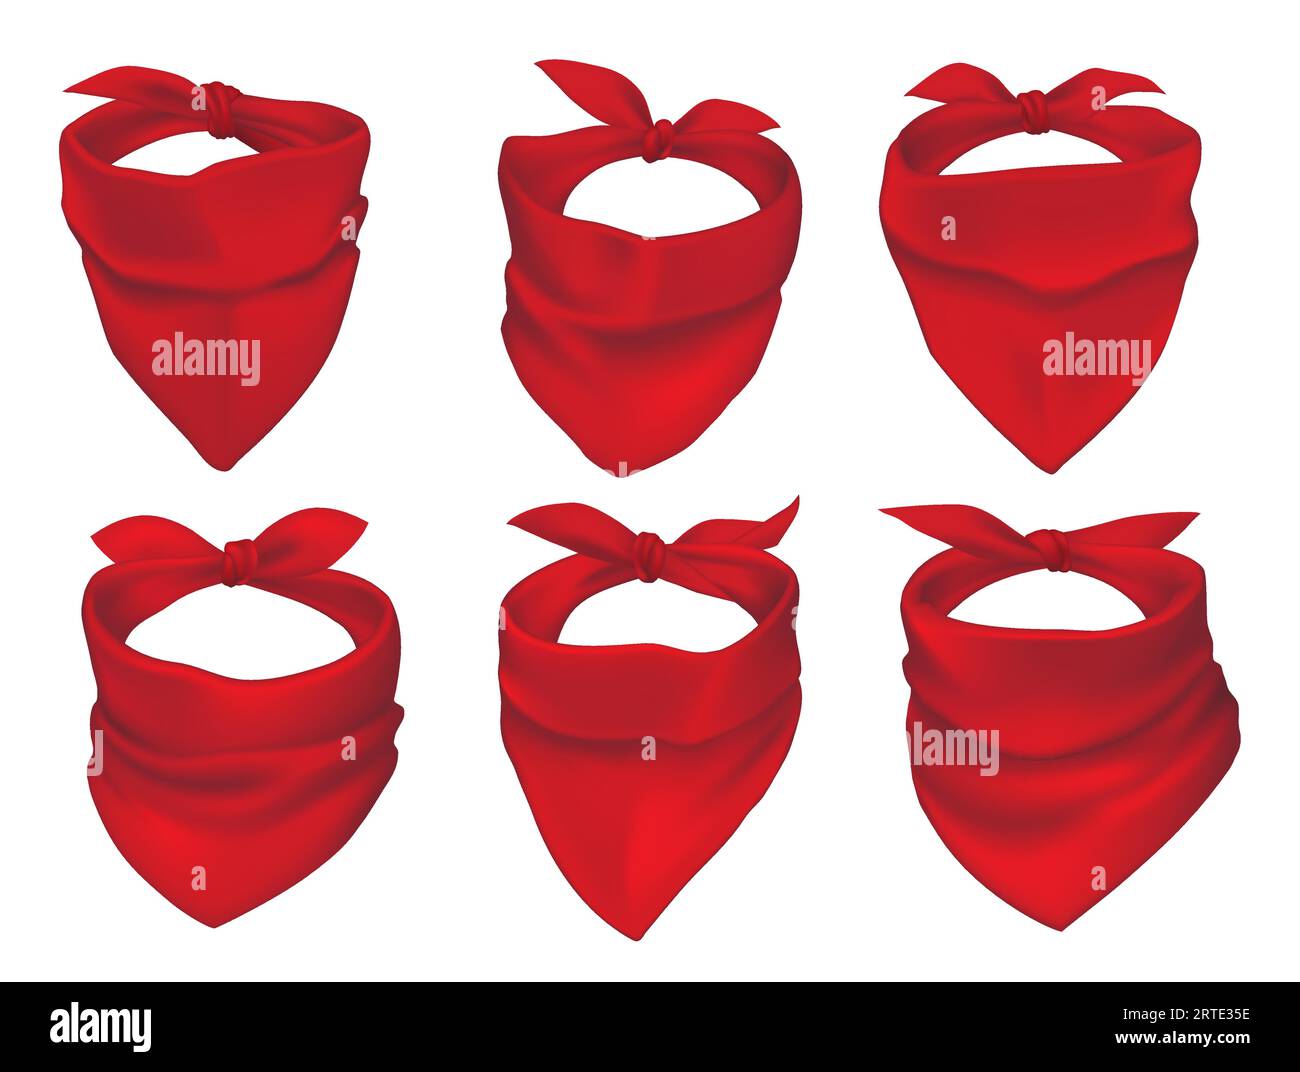 Red bandanas, face mask or neck scarfs mockup. Cowboy, bandit or protester masks, biker clothing element. Silk headband tied with knot, neckerchiefs with creases 3d realistic vector set Stock Vector